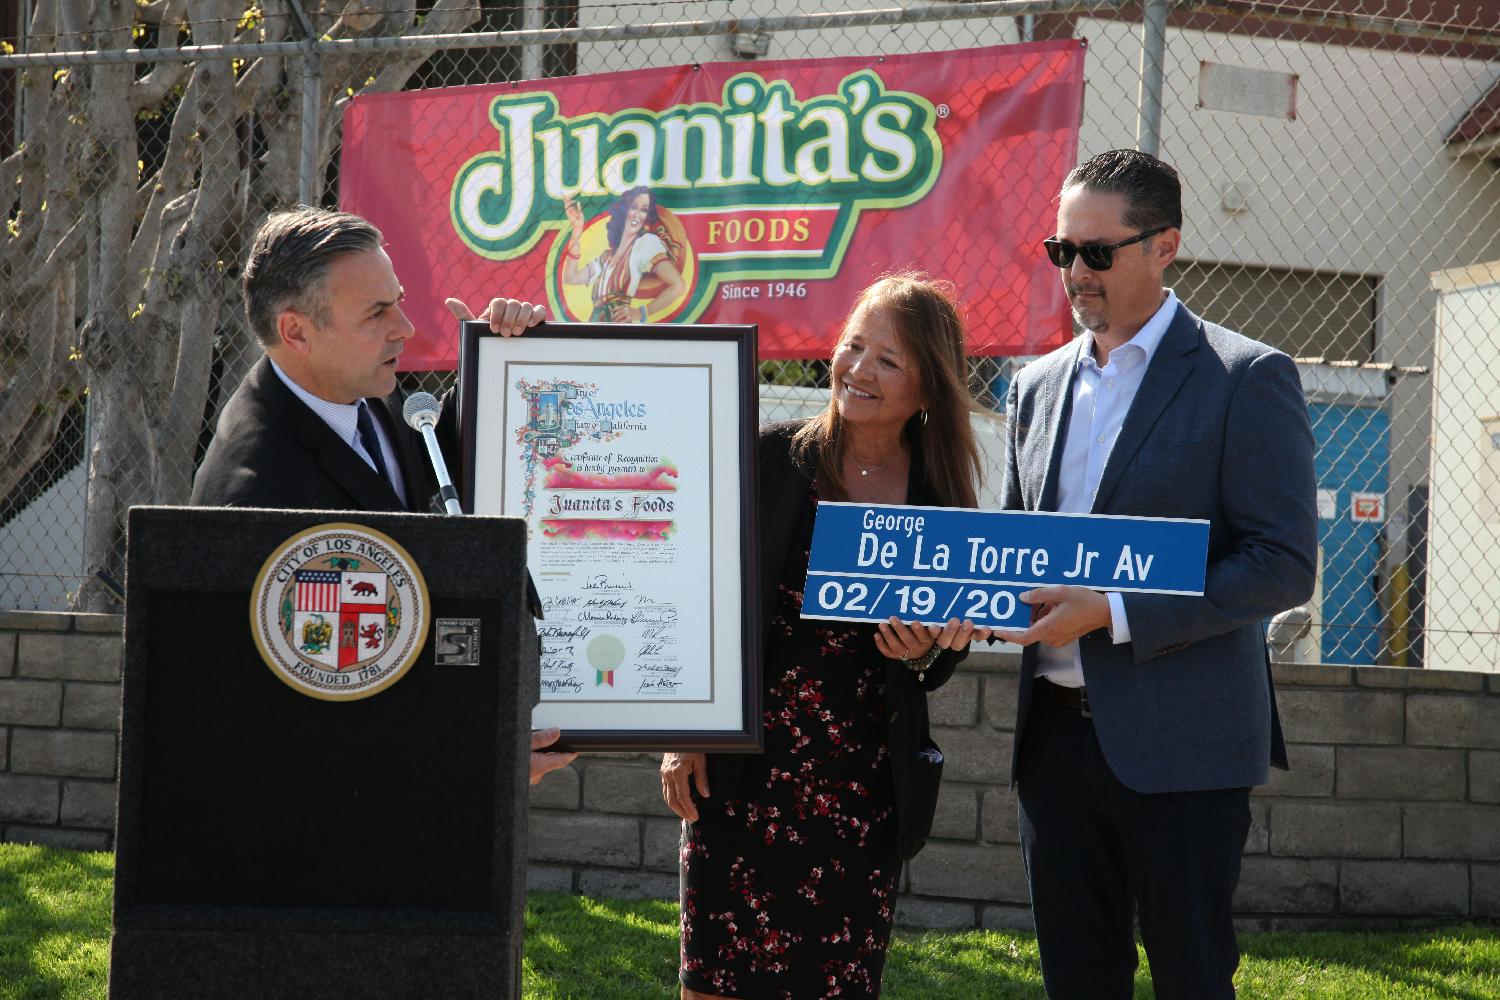 The City of Los Angeles honors our founder George De La Torre Jr by renaming a portion of our street to his name. 